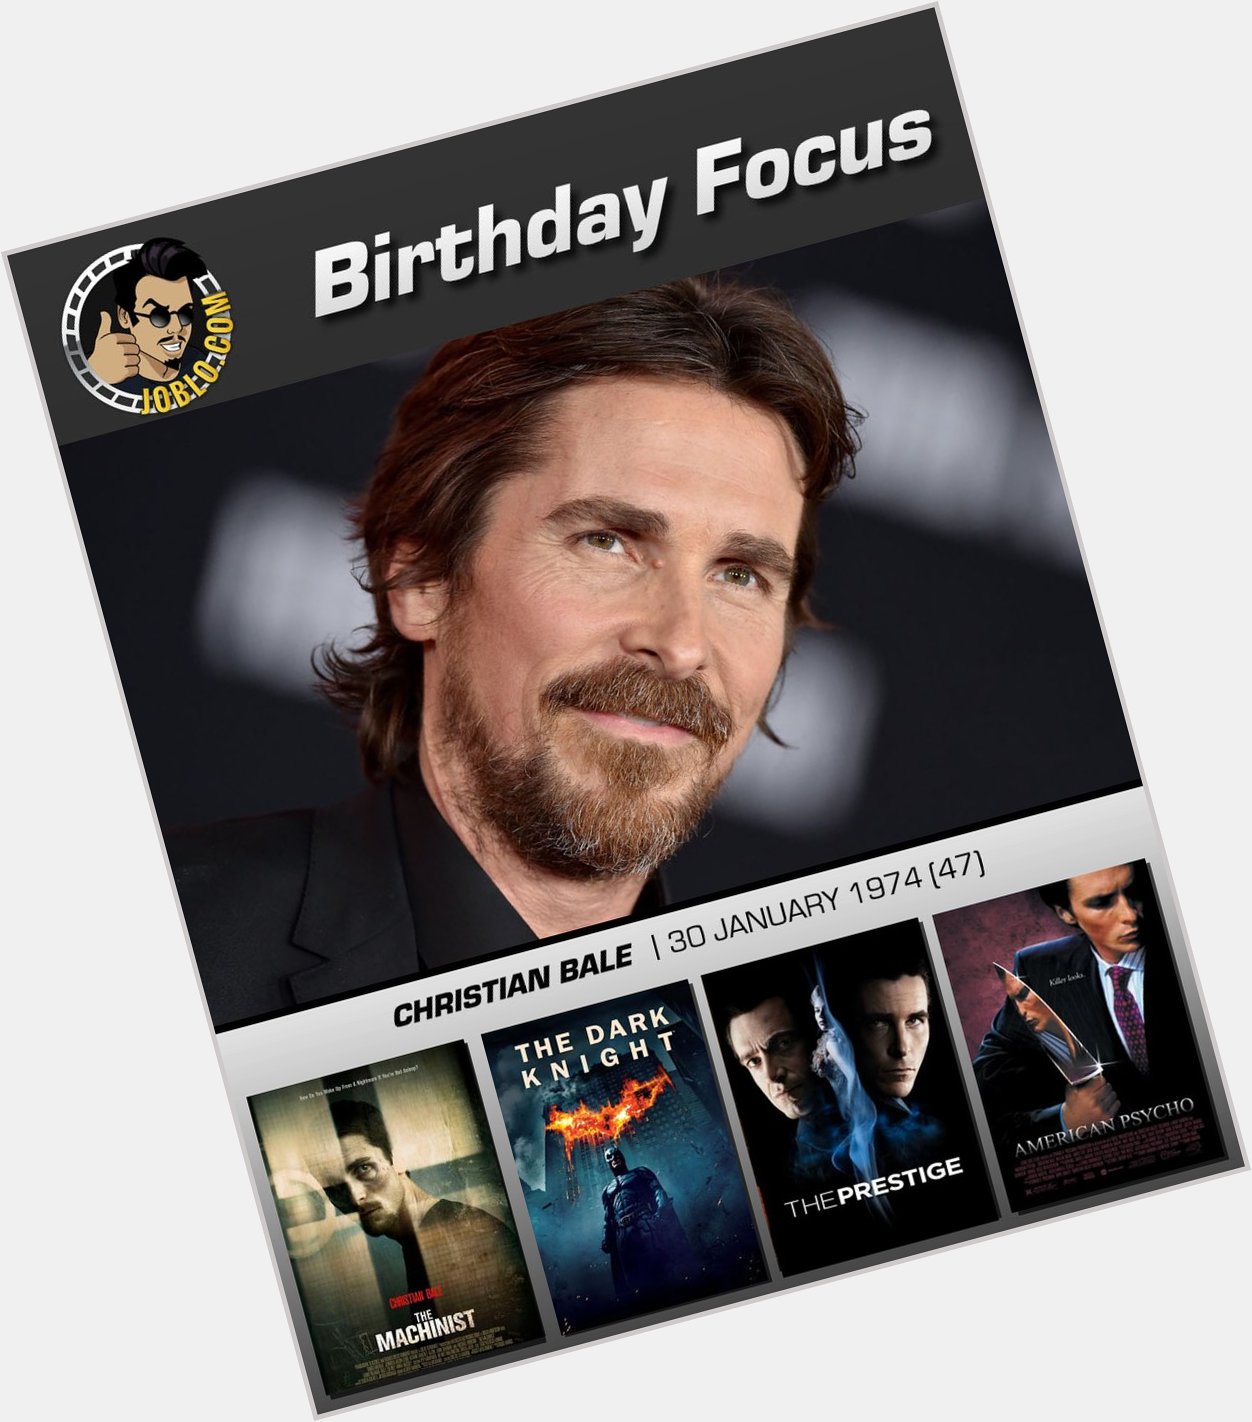 Wishing Christian Bale a very happy 47th birthday!

What is your favorite film of his? 